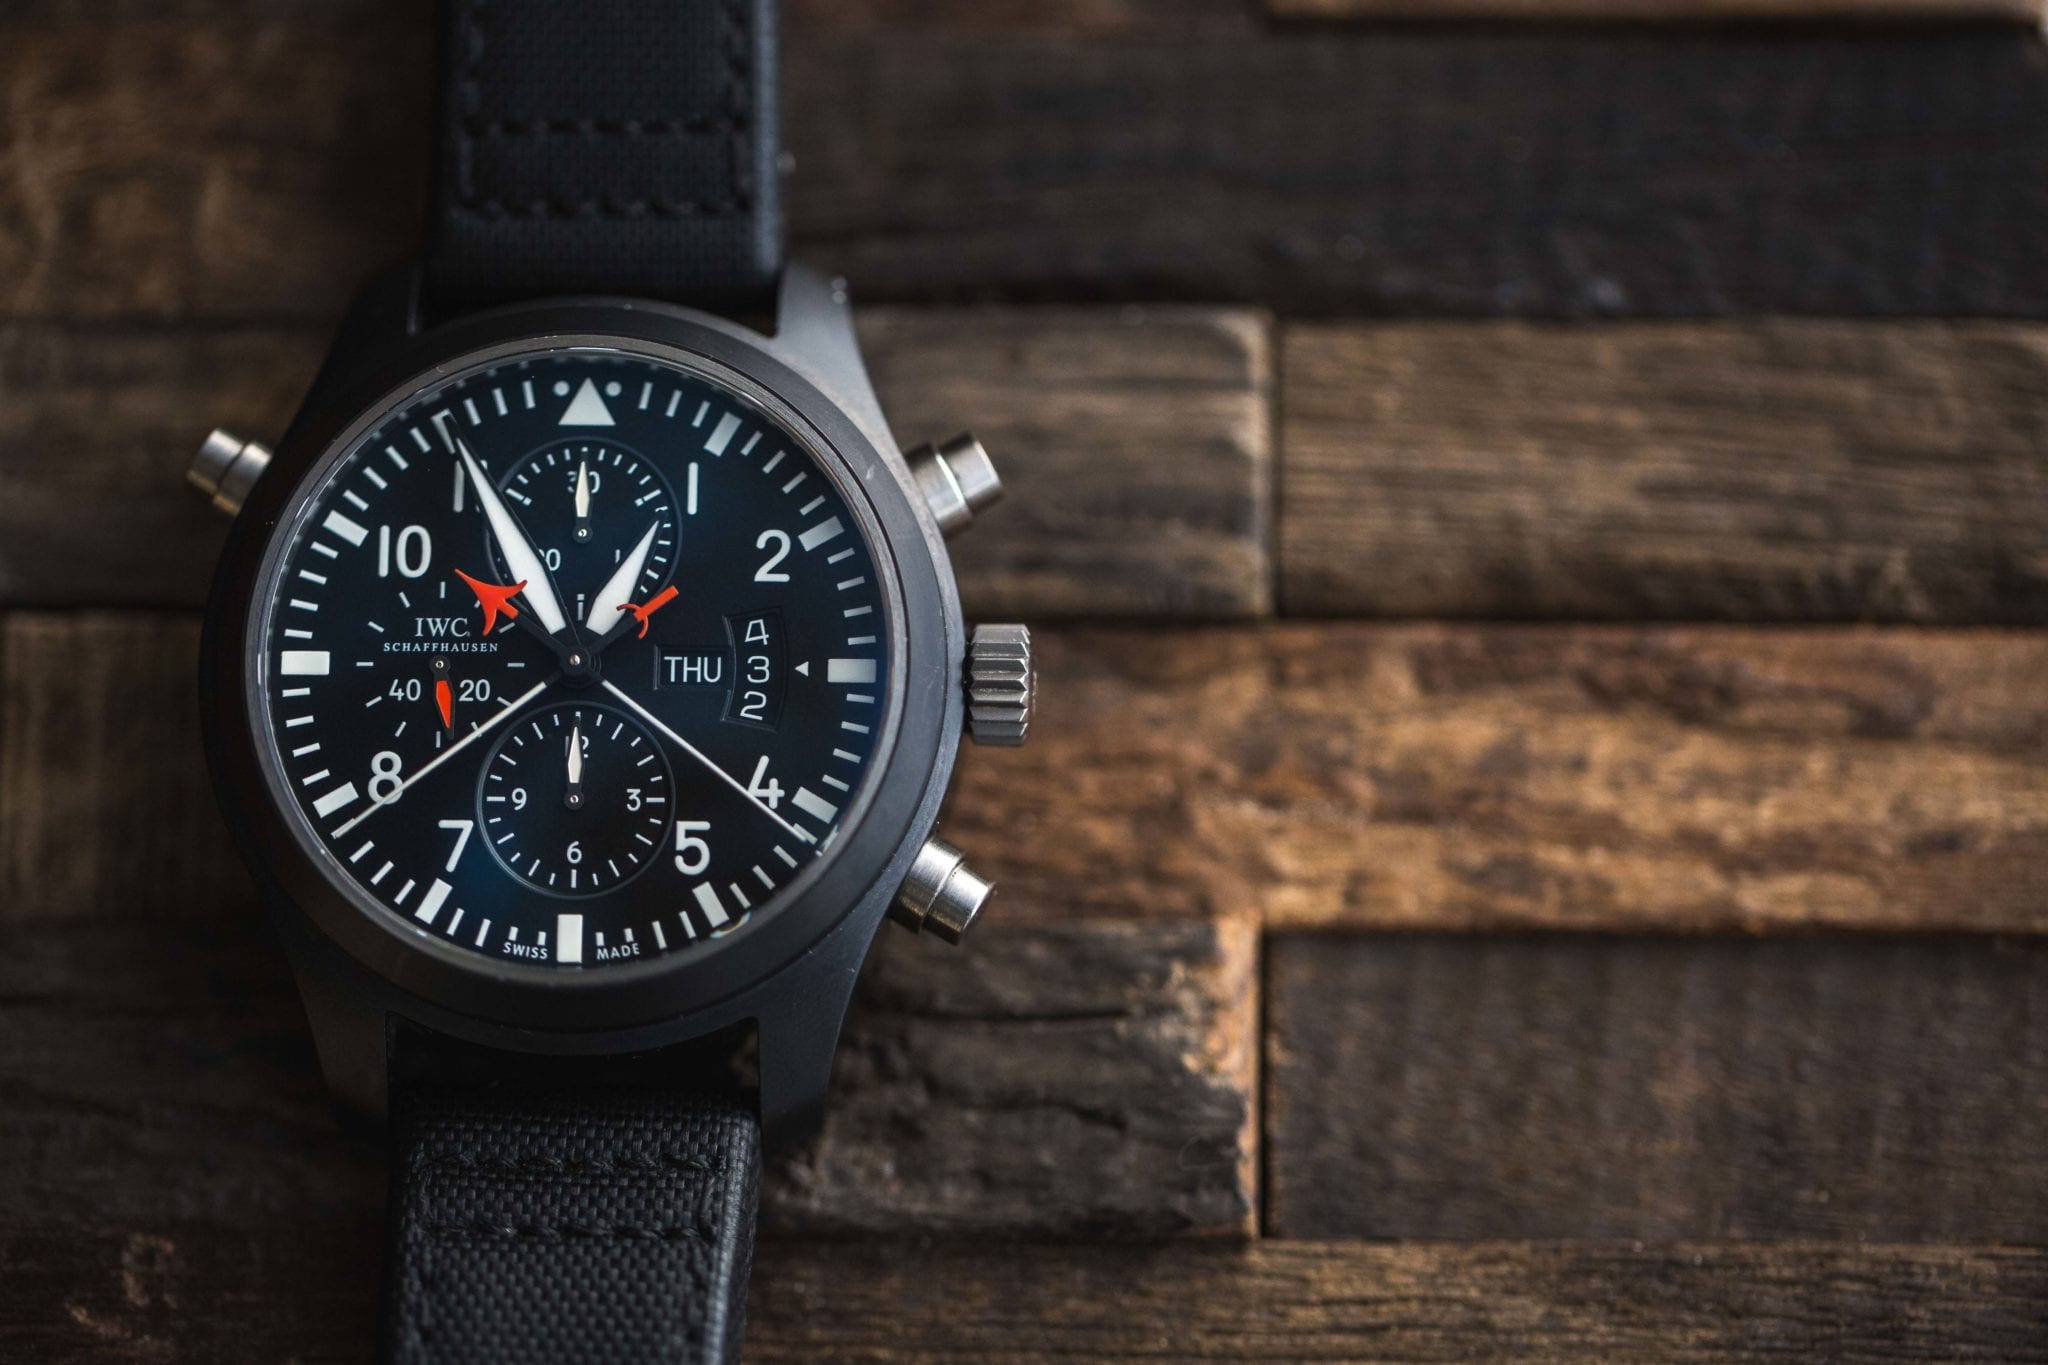 IWC Pilot's Watch Chronograph Top Gun Edition “SFTI” – The Watch Pages ...